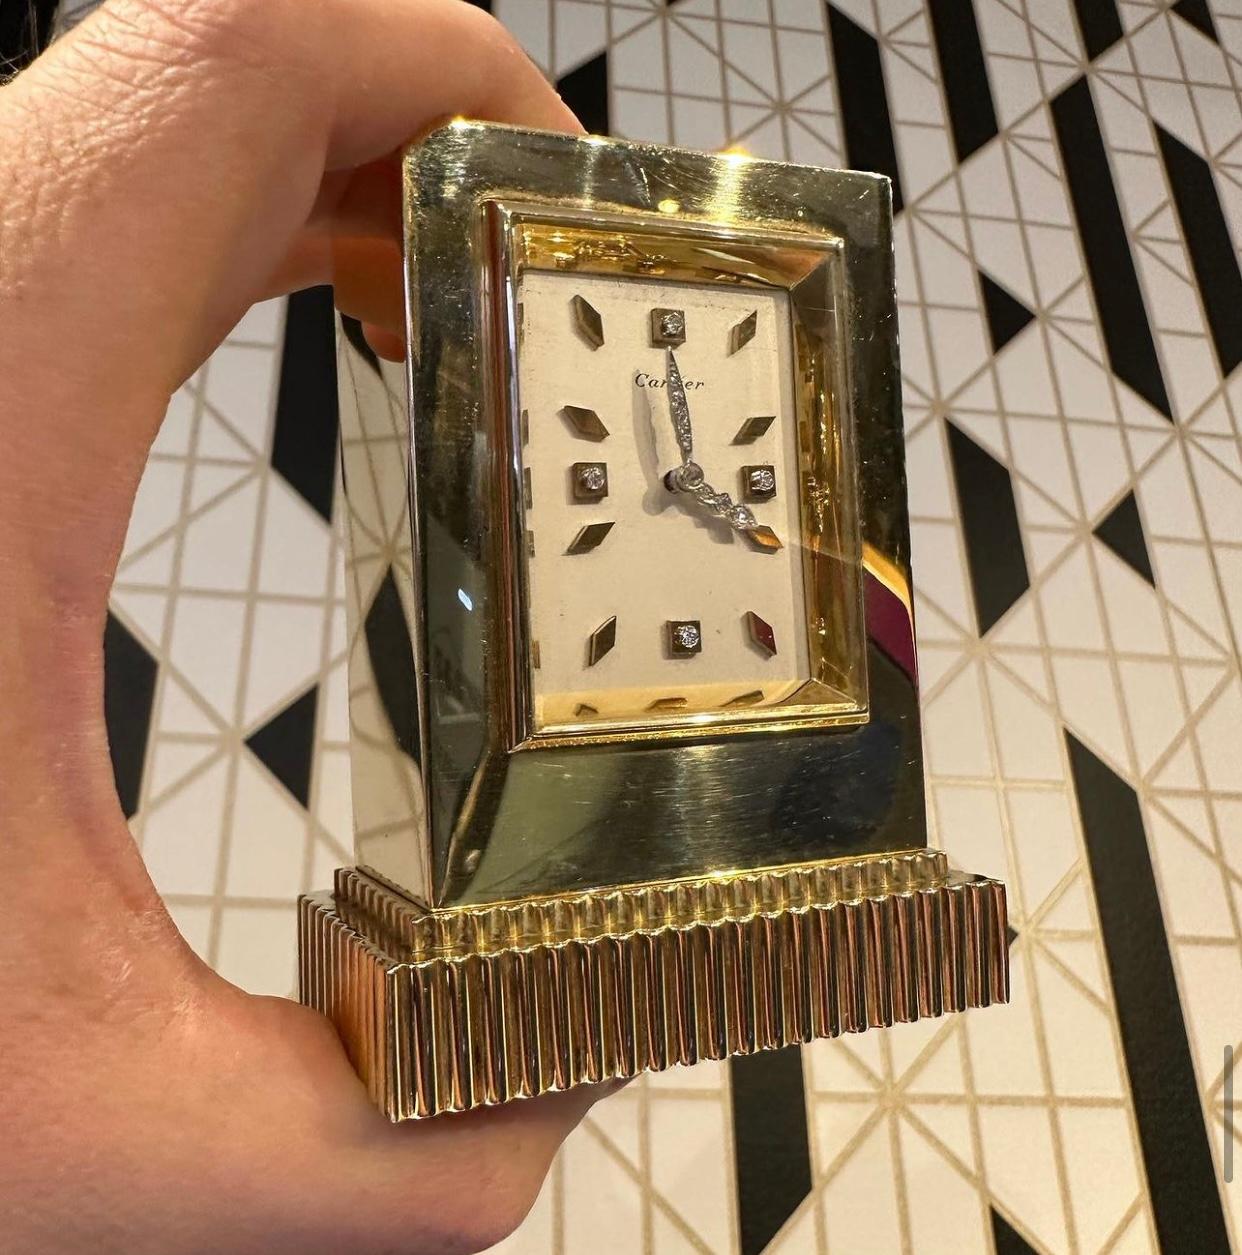 Cartier Gold Desk Clock

A beautifully crafted gold desk clock

The white dial is embellished with diamonds on the hands and at the 3, 6 9, and 12 o'clock markers. 

Signed Cartier

Mechanical movement with manual winding. Accompanied by the